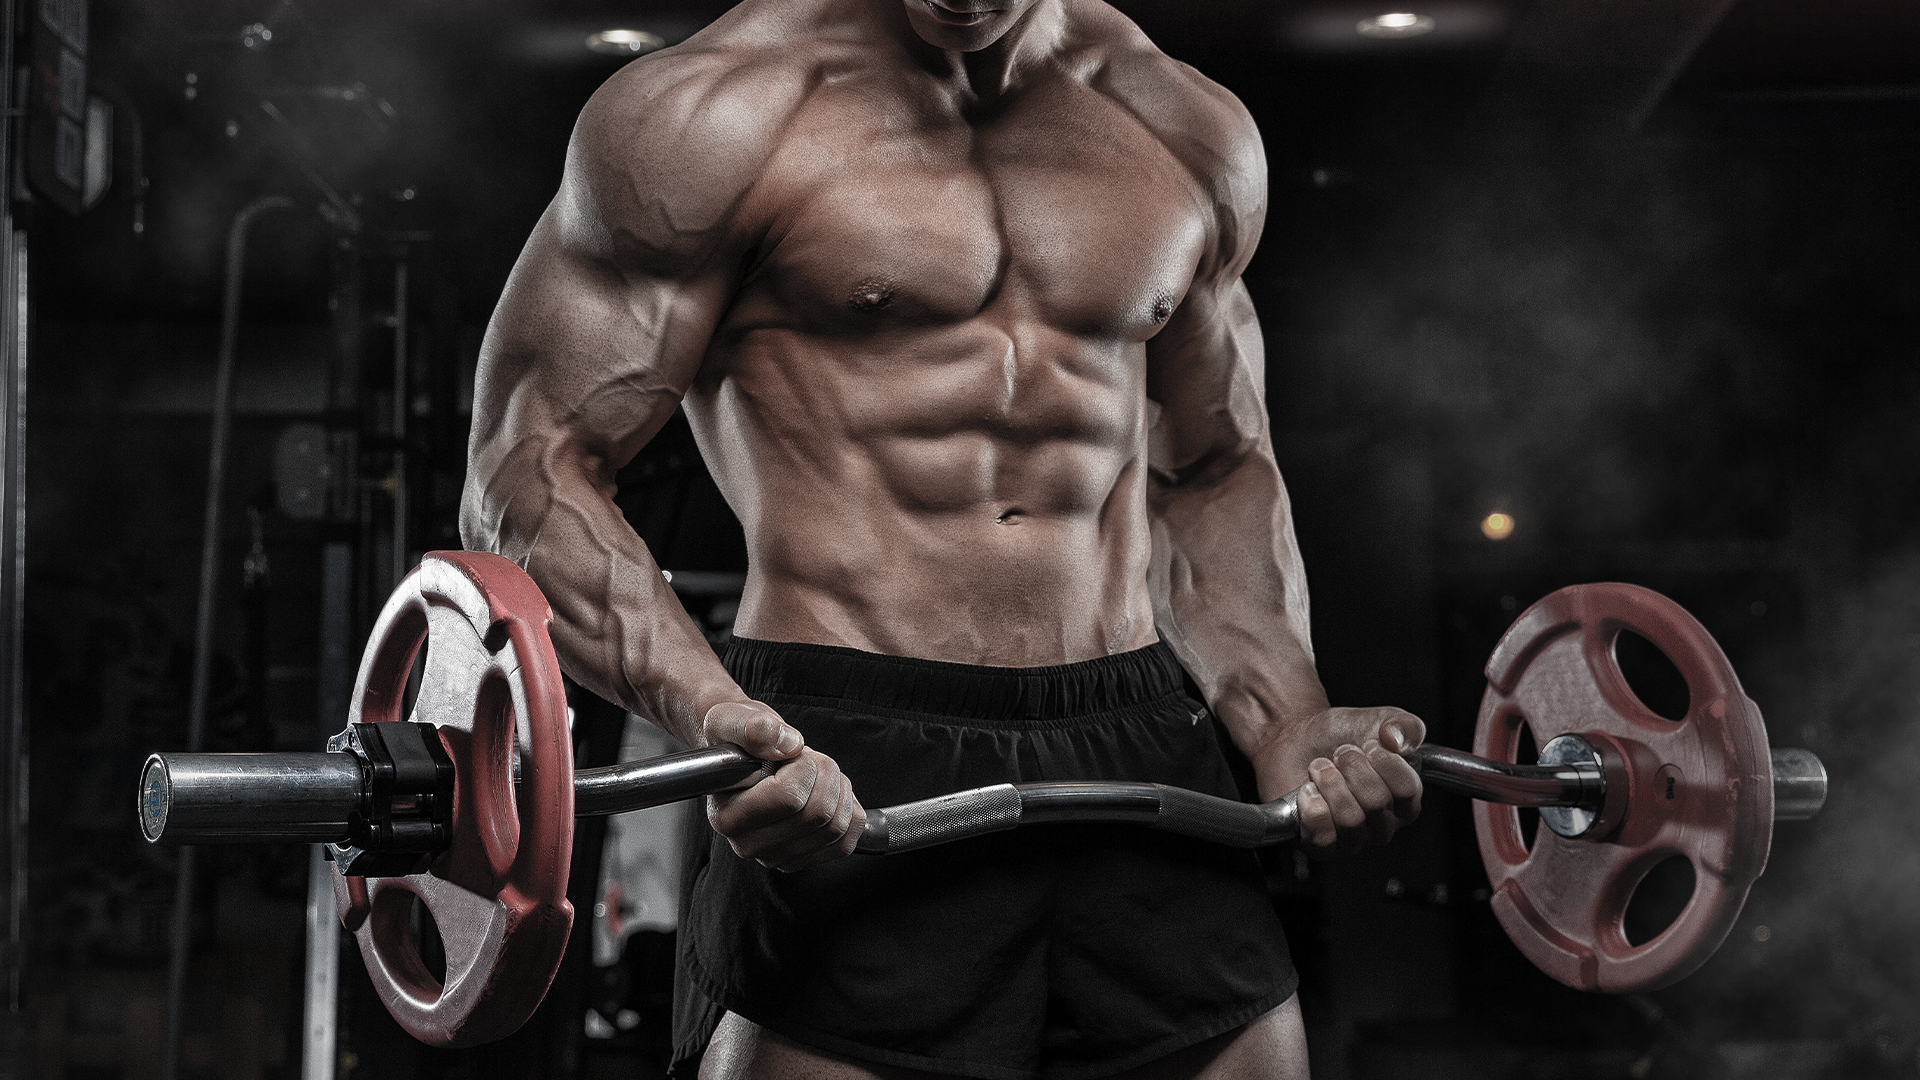 How to increase testosterone levels quickly